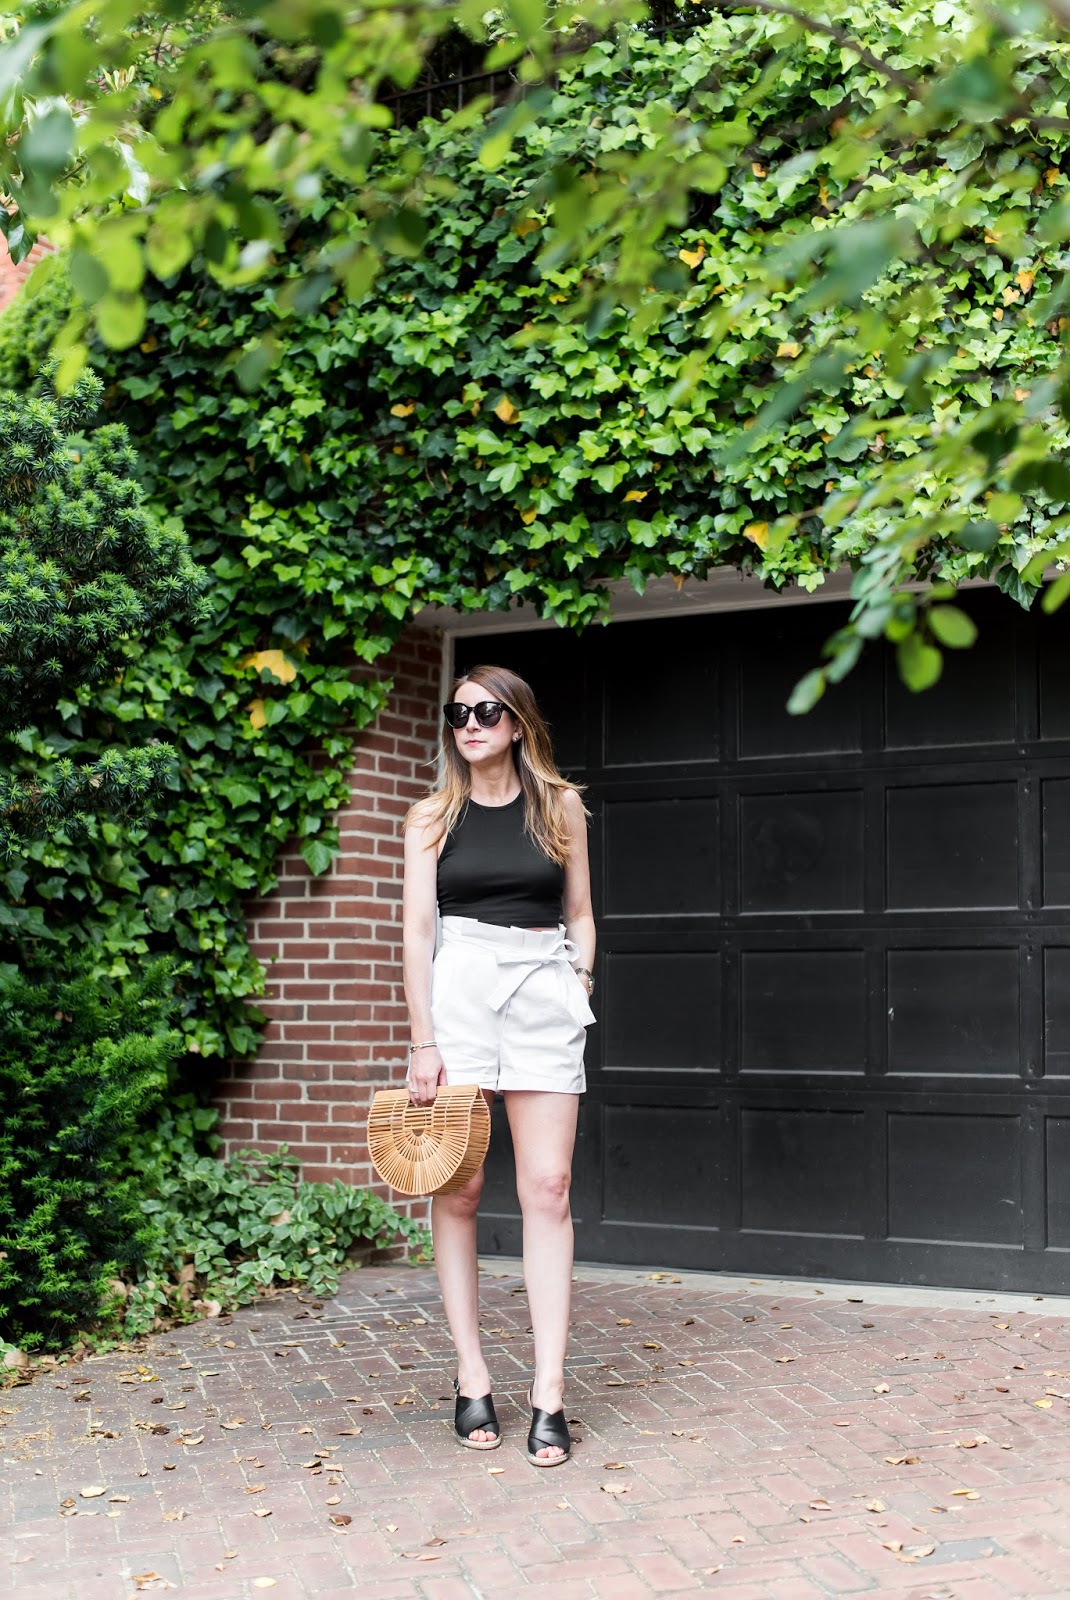 TIE-WAISTED SHORTS AND A CROP TOP YOU CAN PULL OFF - Laura Lehman Wears